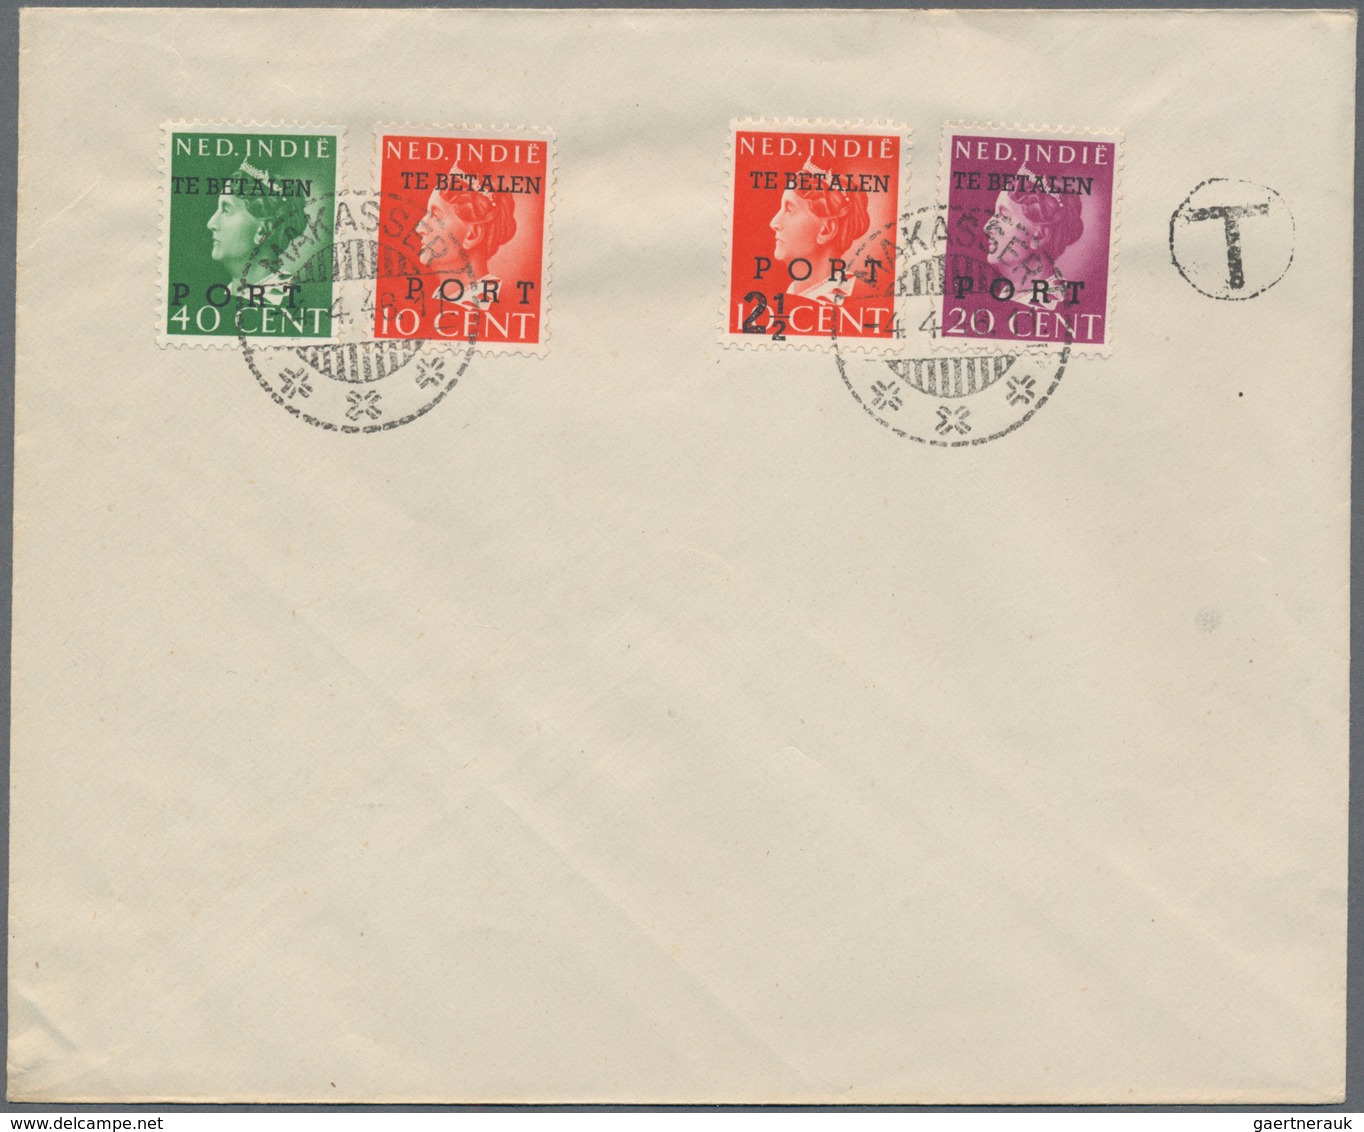 Niederländisch-Indien: 1880/1950 ca., comprehensive lot of ca.270 covers, cards and stationeries, co